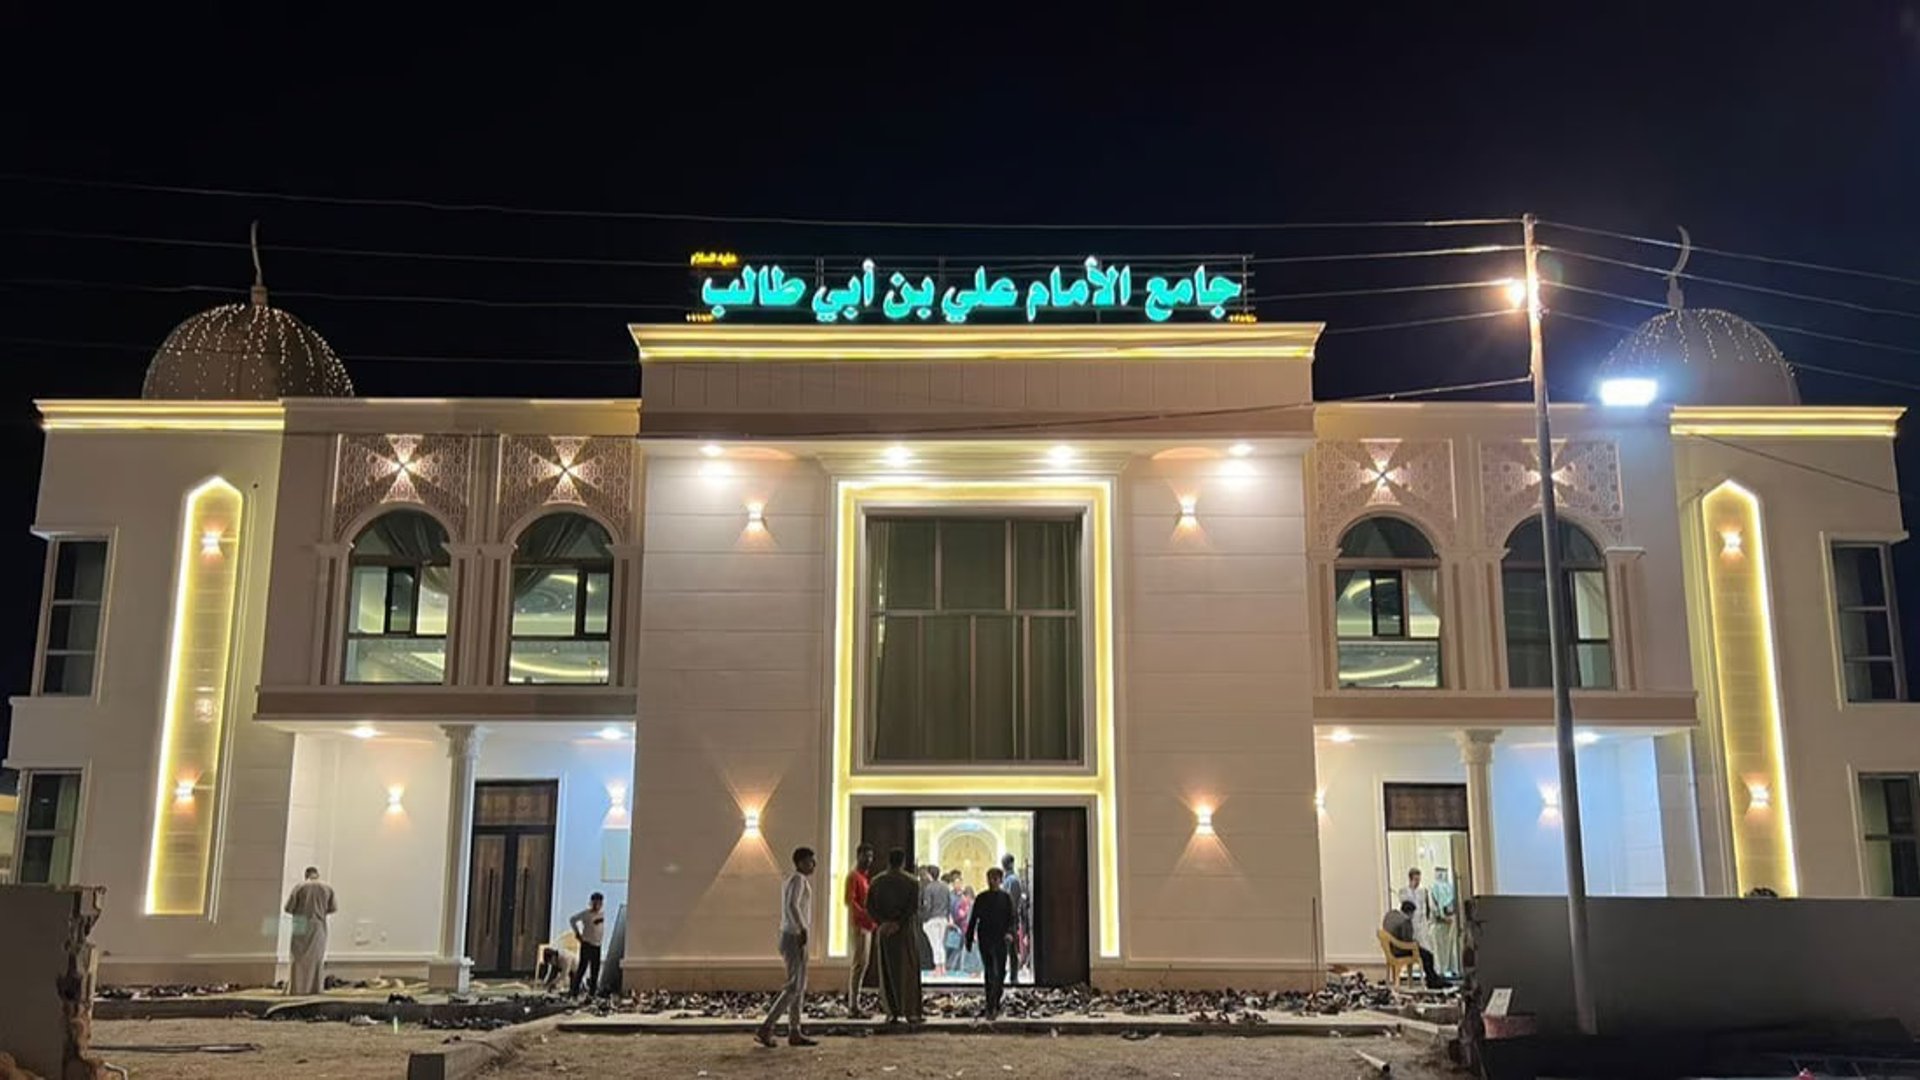 AlHabbaniyah community reopens mosque damaged in ISIS conflict